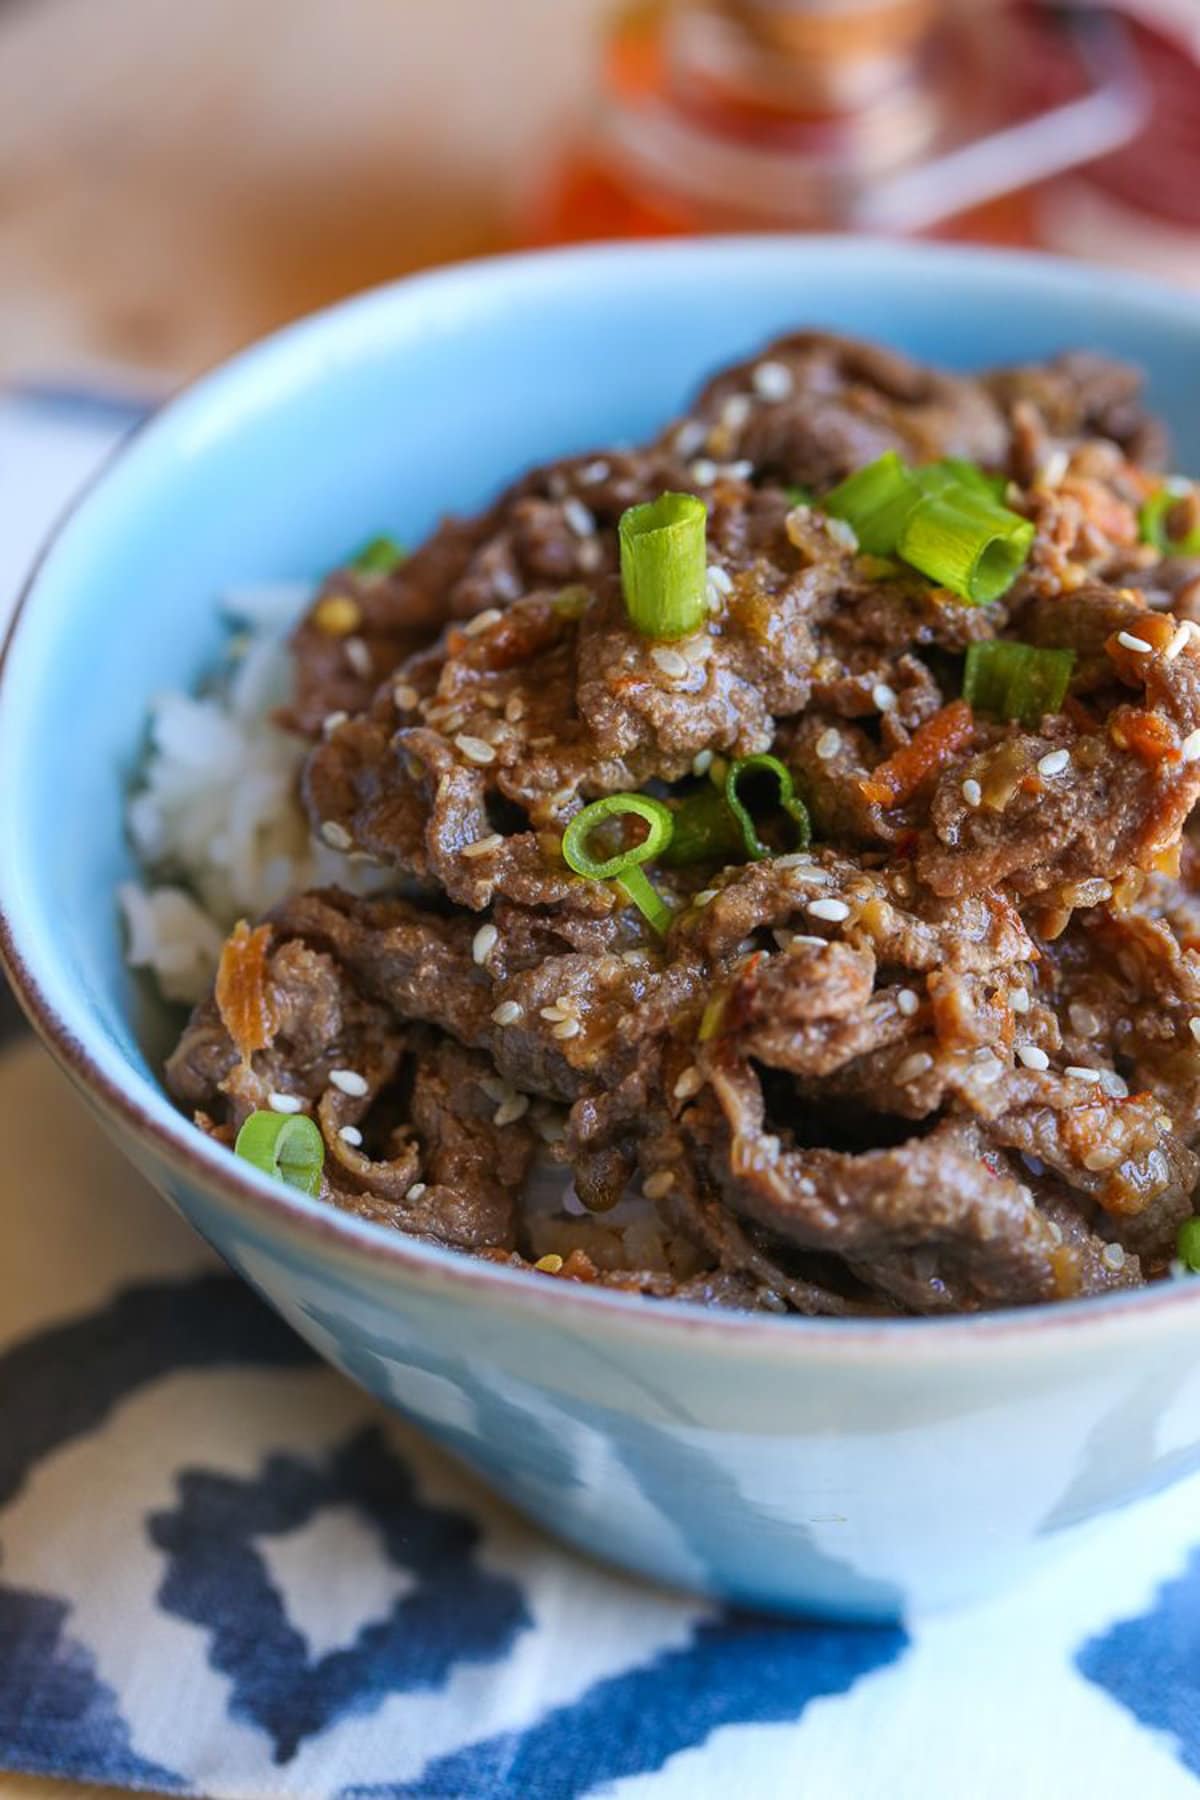 Asian fire meat prepared on rice